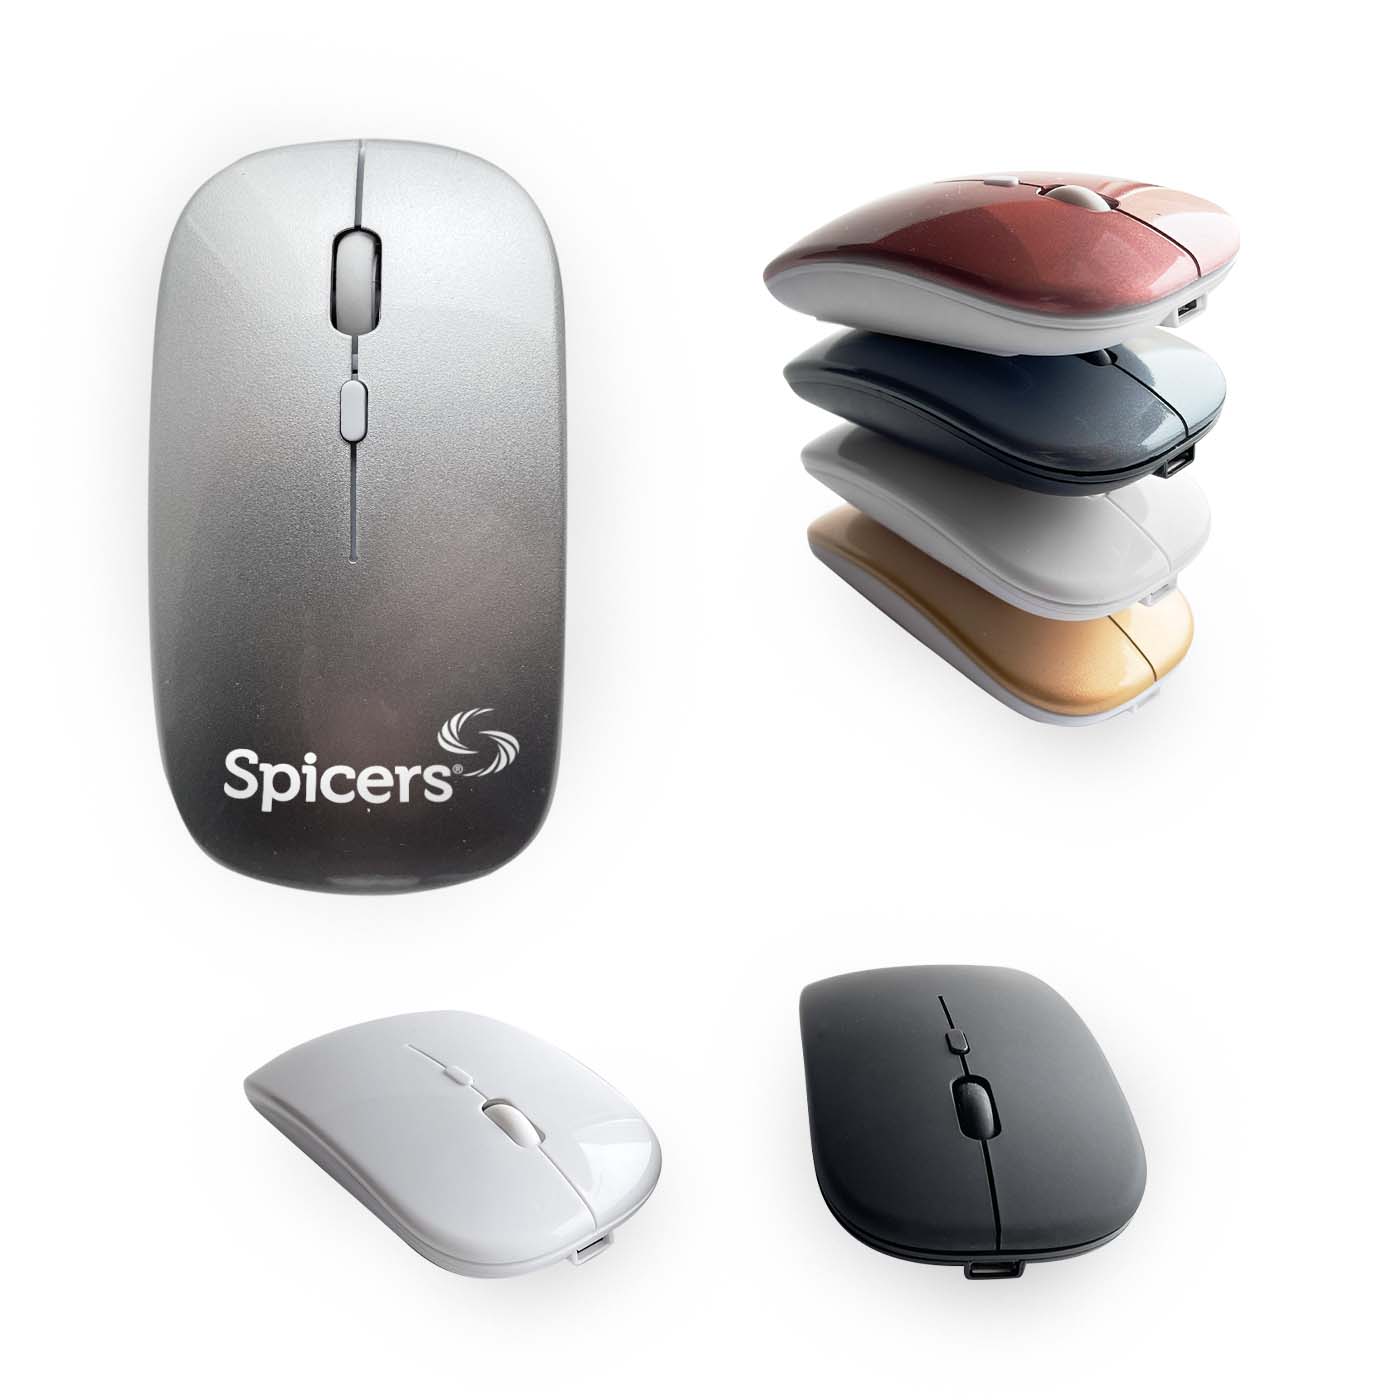 Rechargeable 2.4G interface Optical Wireless Optical Mouse